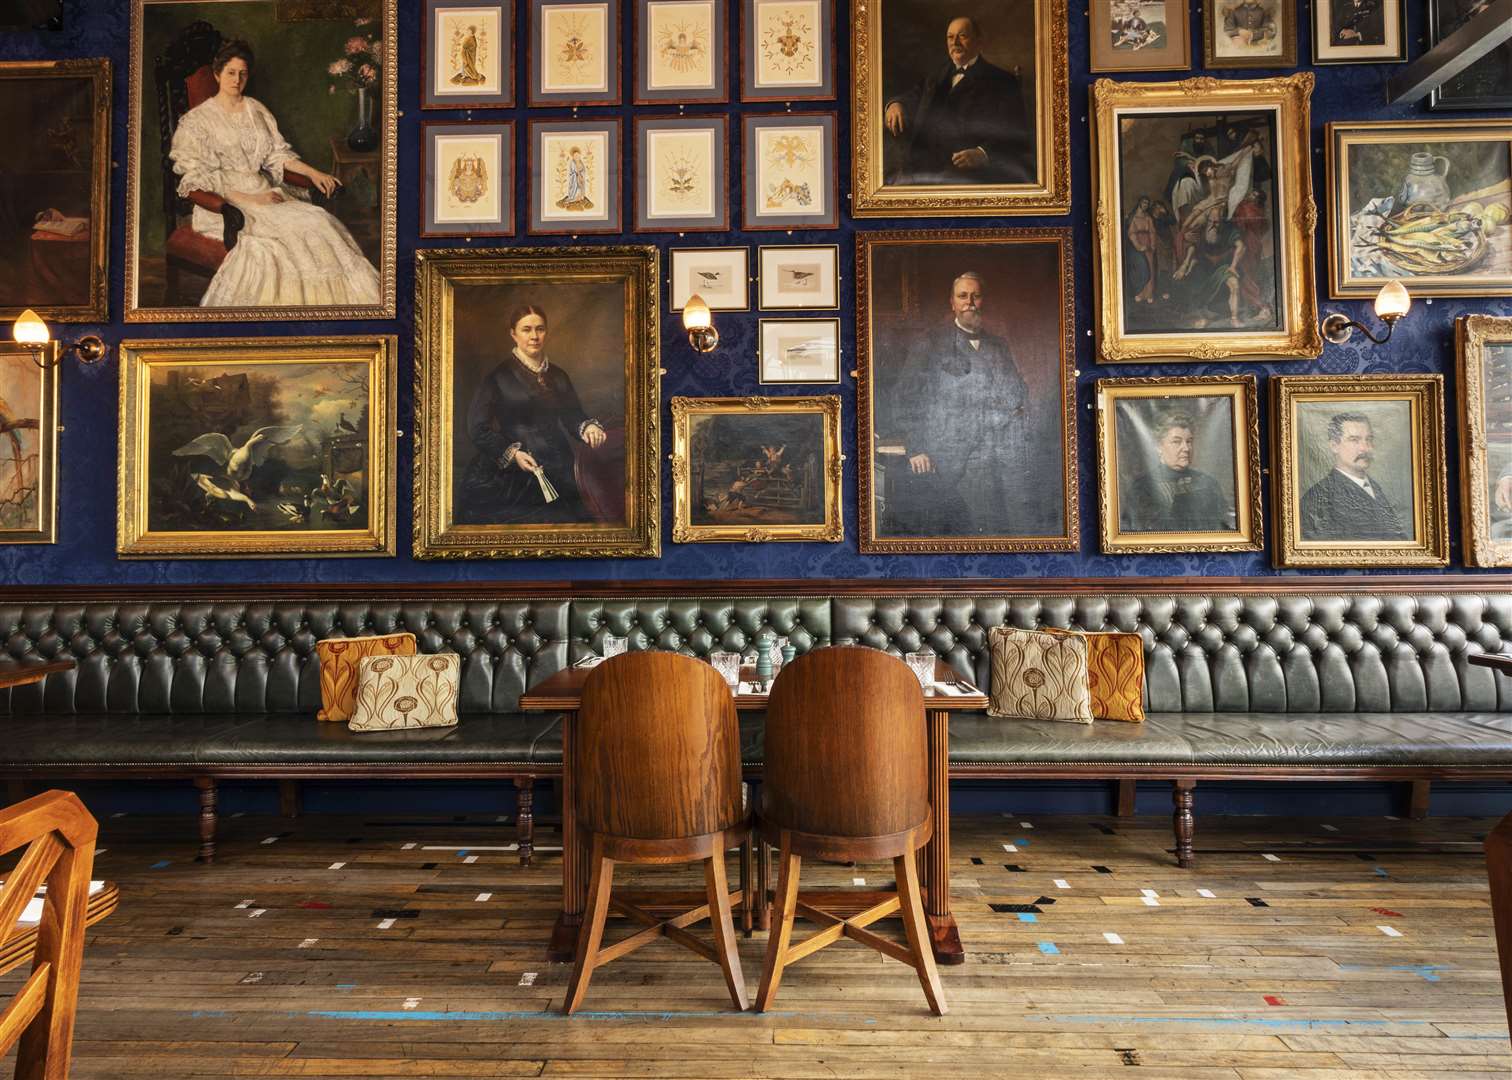 An example of Cosy Club's "amazing interiors"